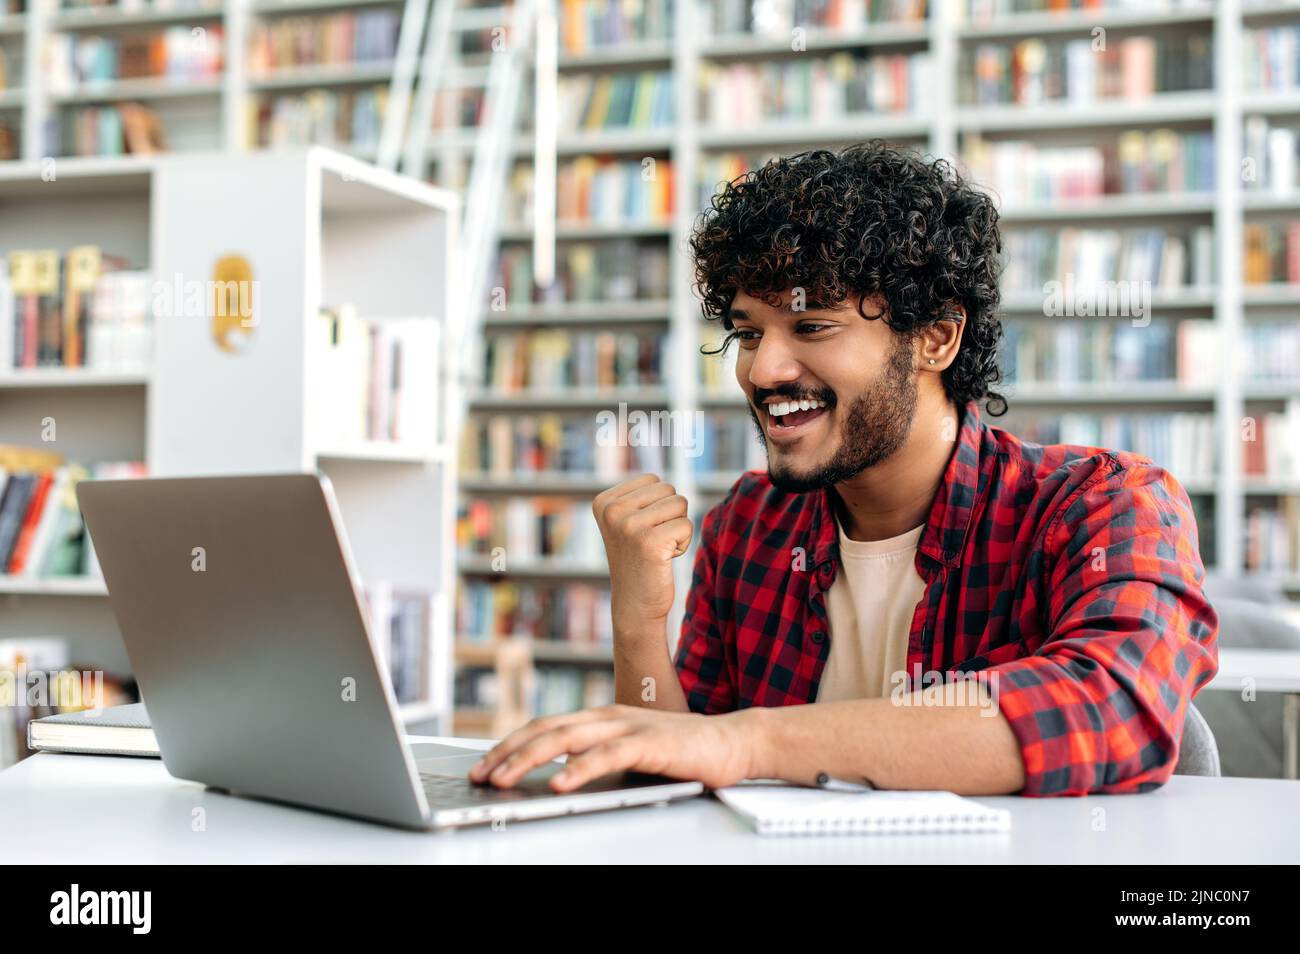 Cheerful amazed indian or arabian guy, student, sitting in university library with laptop, rejoices in success, win, good mark on the exam, gesturing hand, smiling, emotional face expression Stock Photo